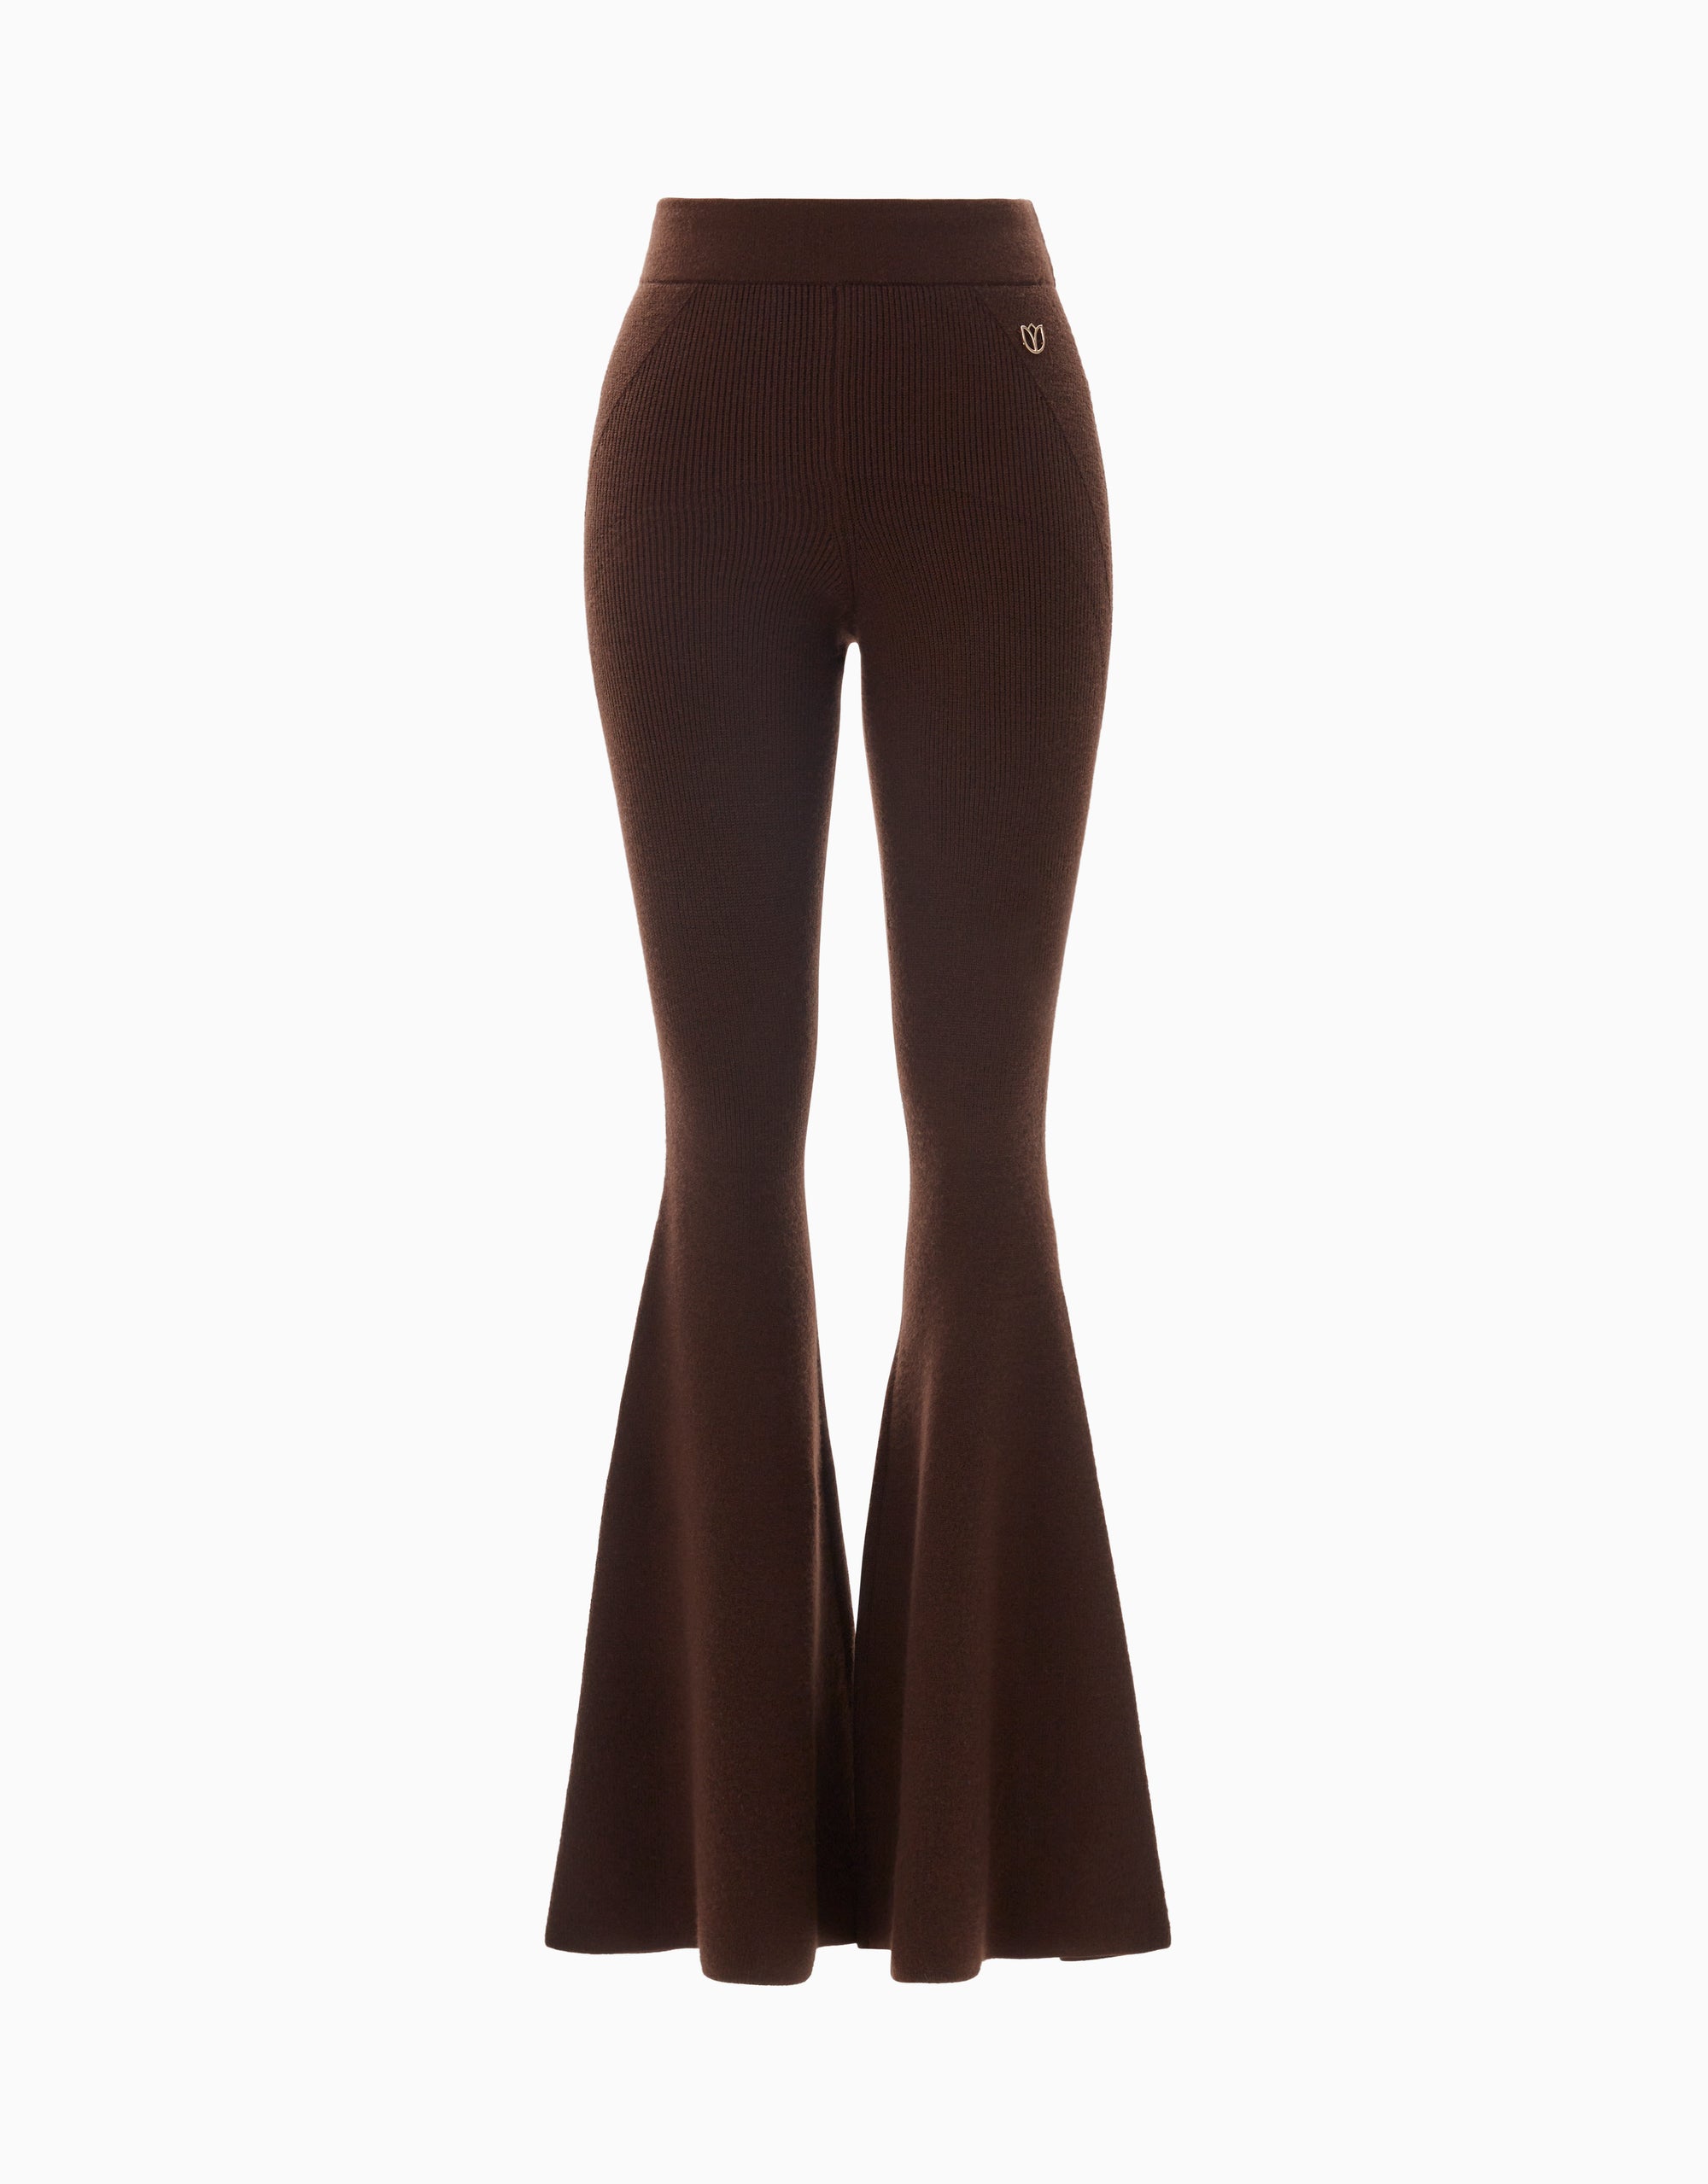 FREYA cashmere ribbed knit flare pant in espresso